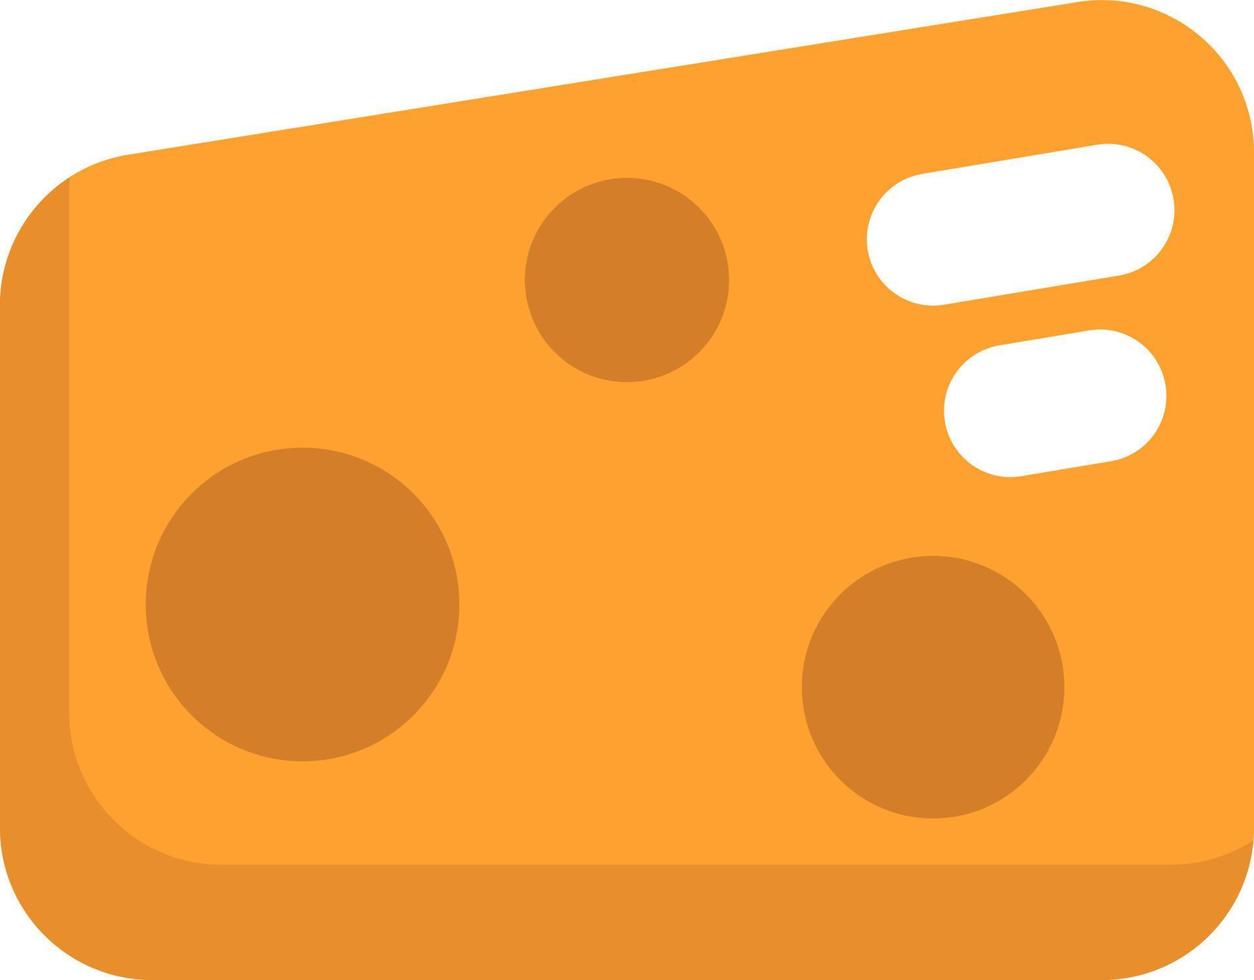 Slice of yellow cheese, illustration, vector, on a white background. vector